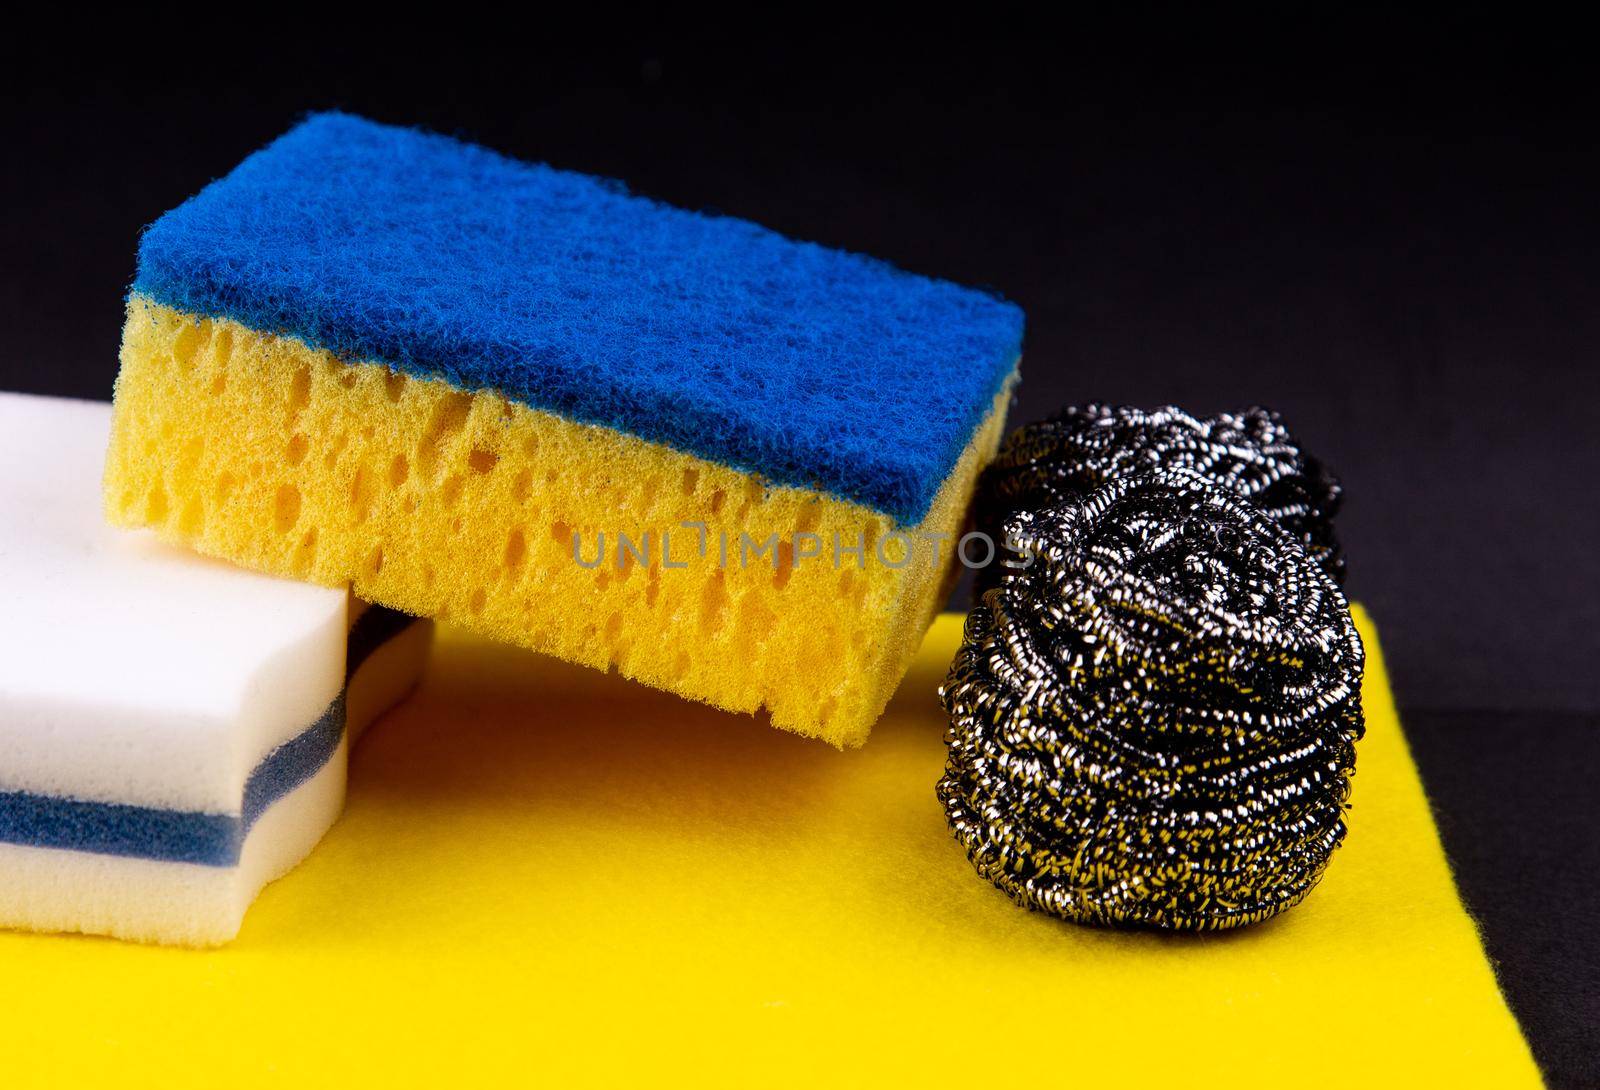 Dishwashing concept. On a black background, different washcloths and scrubbers for washing dishes.